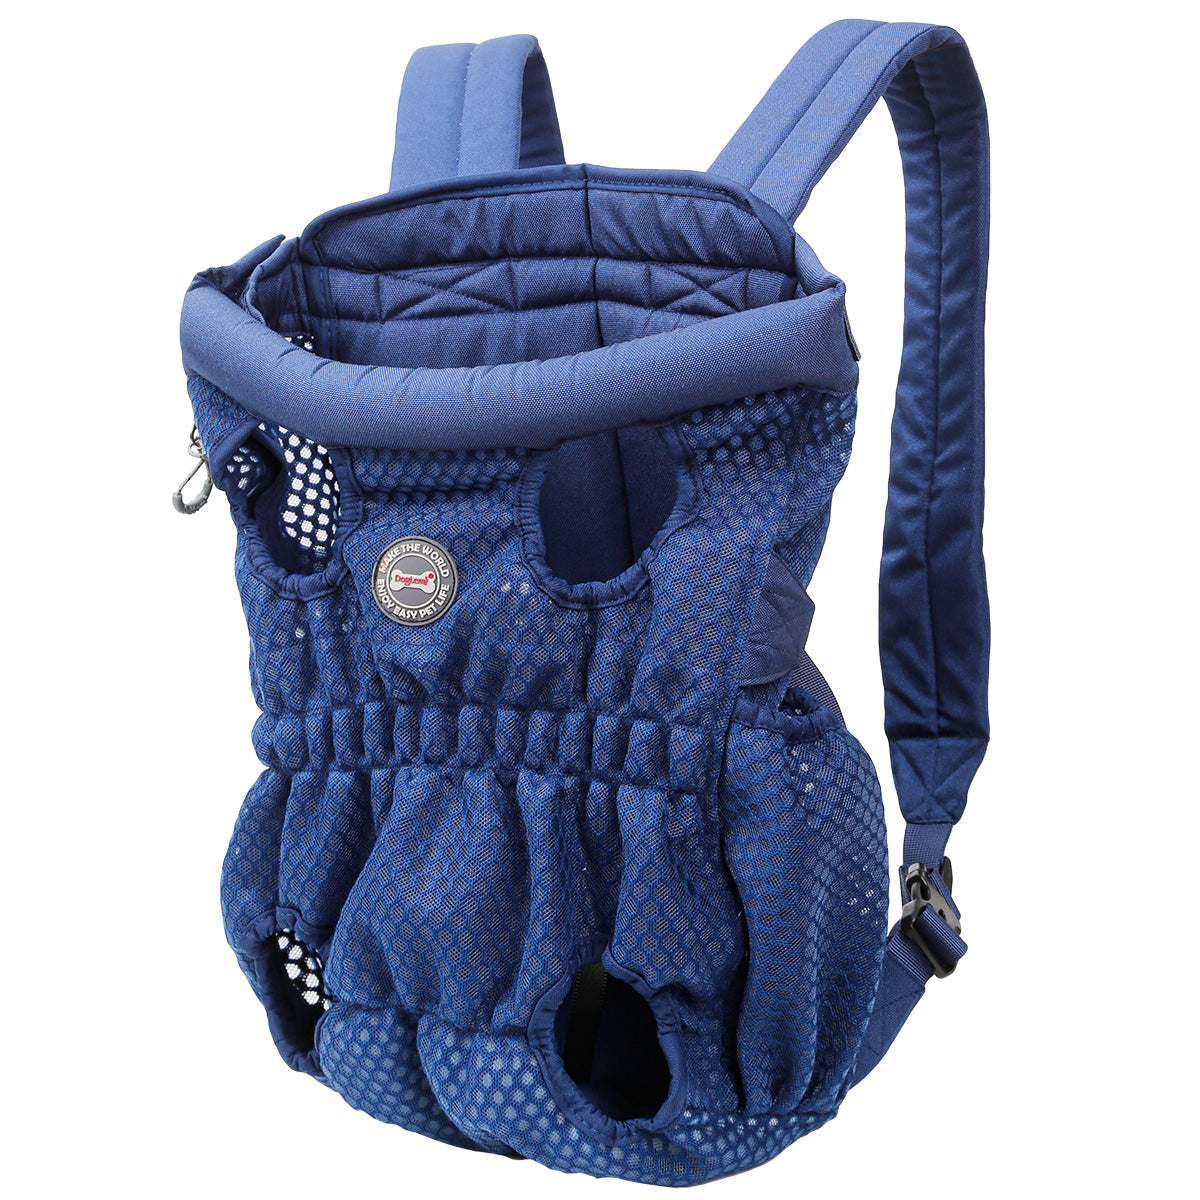 Pet Carrier Backpack Outdoor Travel Lightweight Dog Pet Carrier Mesh Breathable Bag For Puppy Cats - CIVIBUY